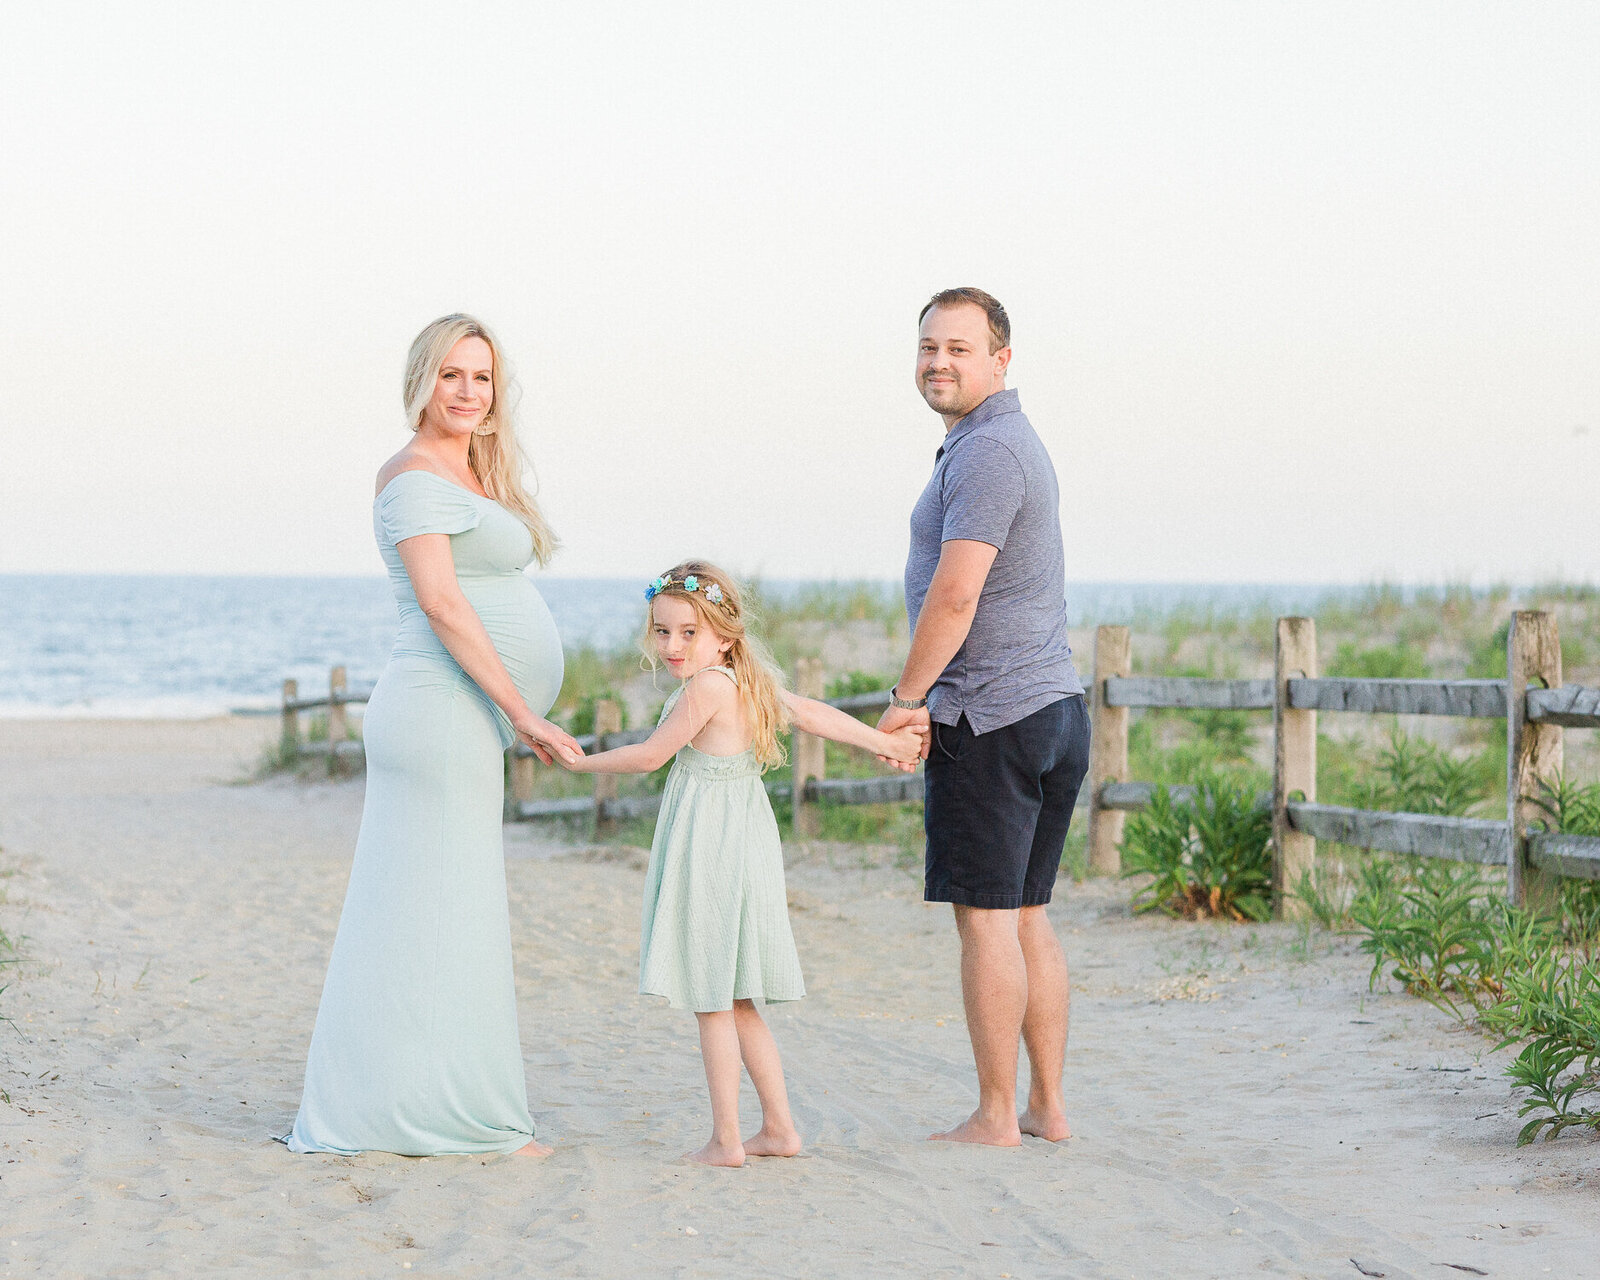 Family beach portrait captured by a Lake Tahoe family photographer